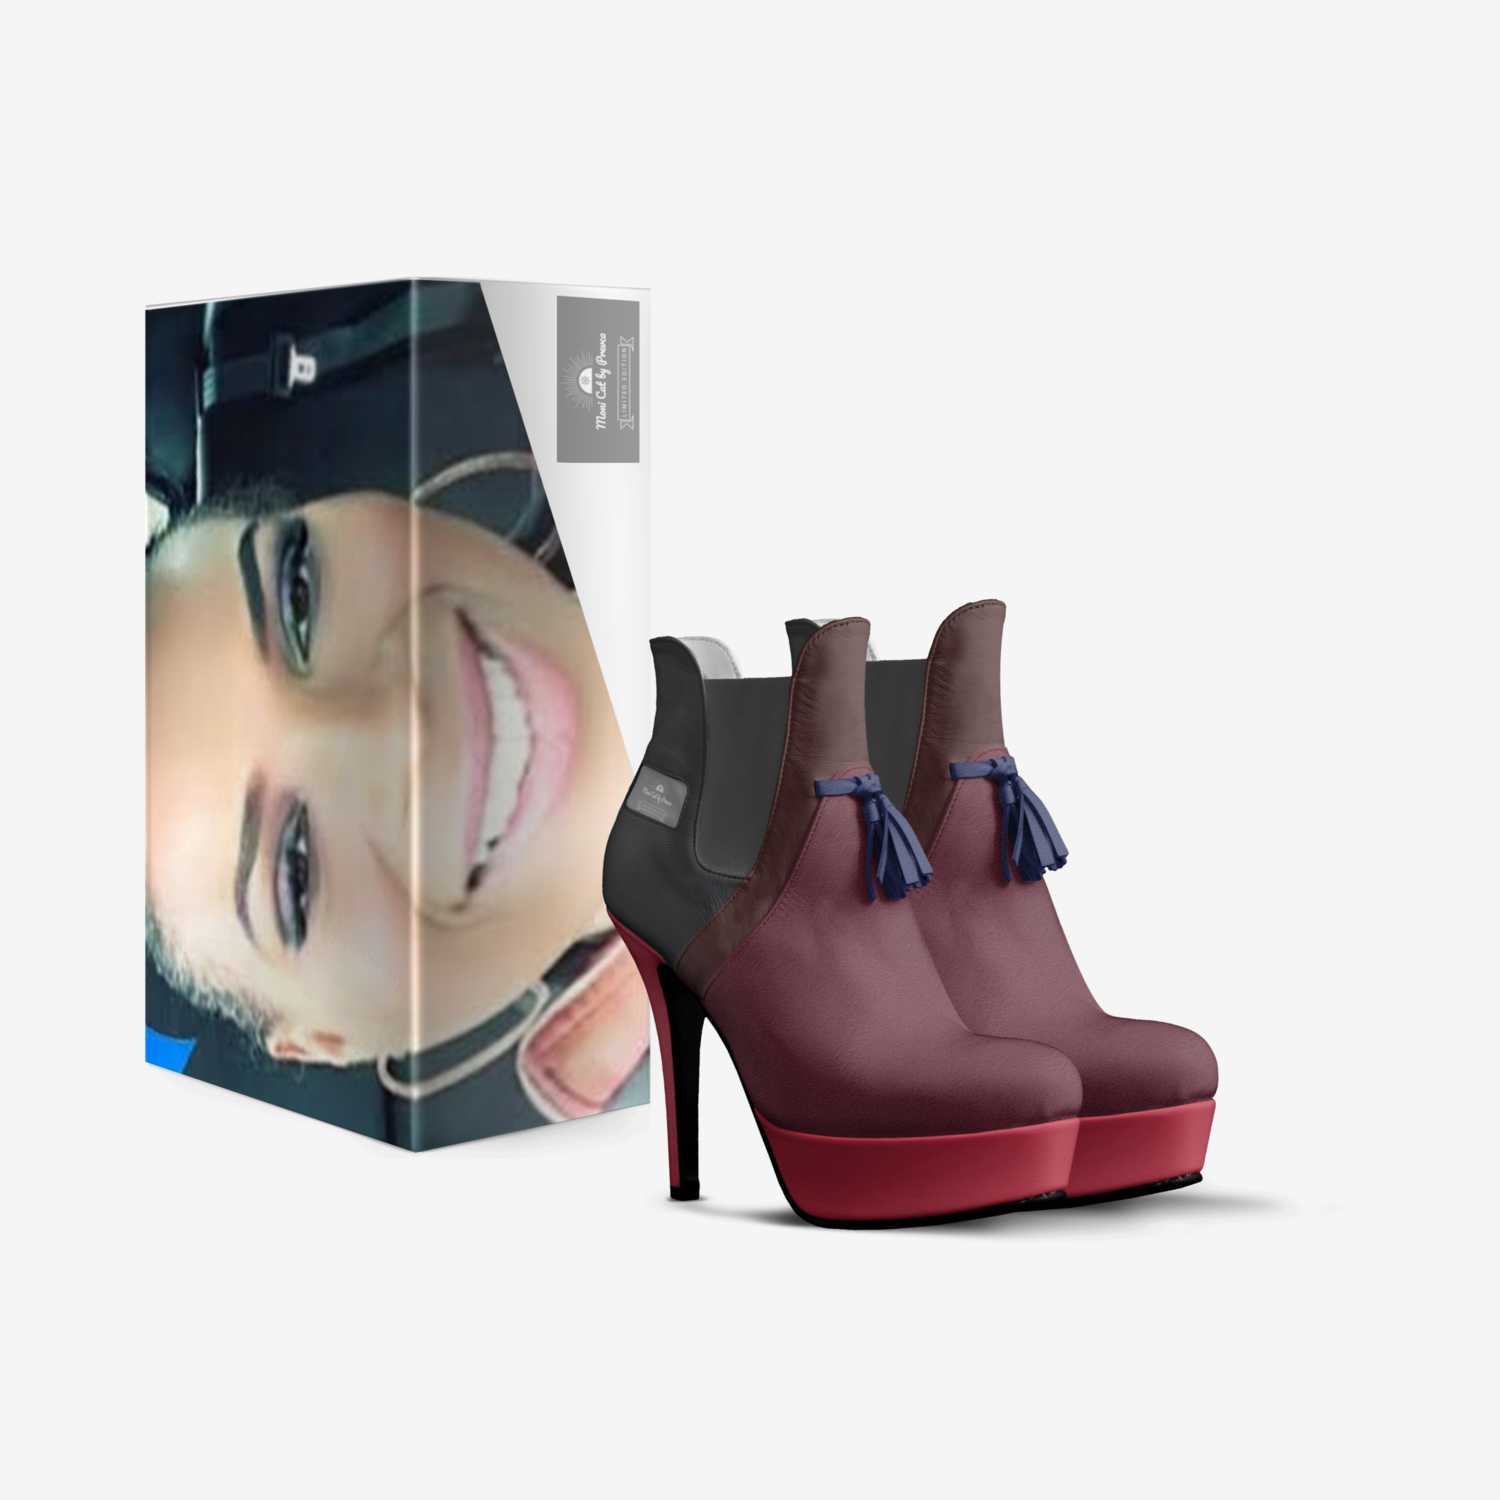 Moni Cat custom made in Italy shoes by Catina Prevost Hinson | Box view